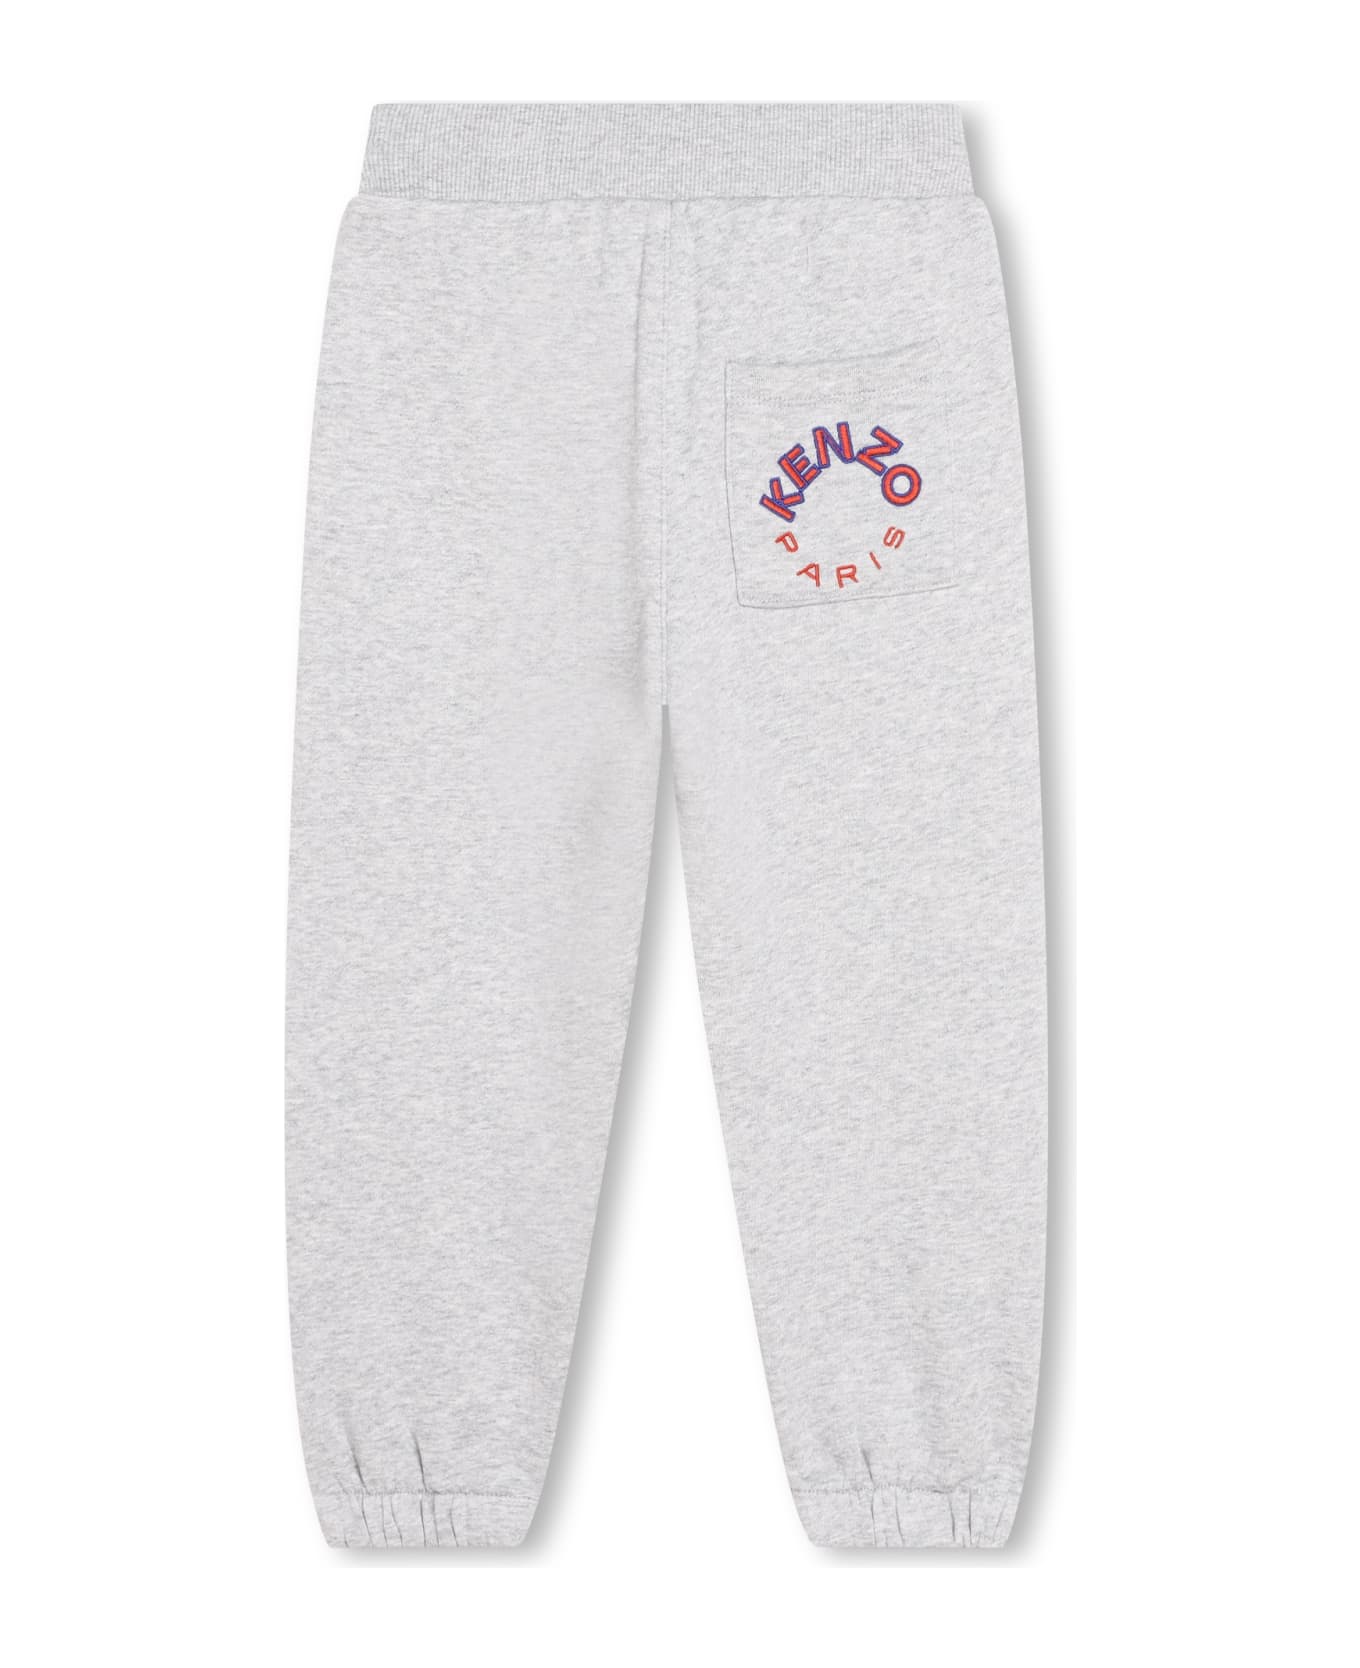 Kenzo Kids Sports Trousers With Application - Grigio Antico ボトムス